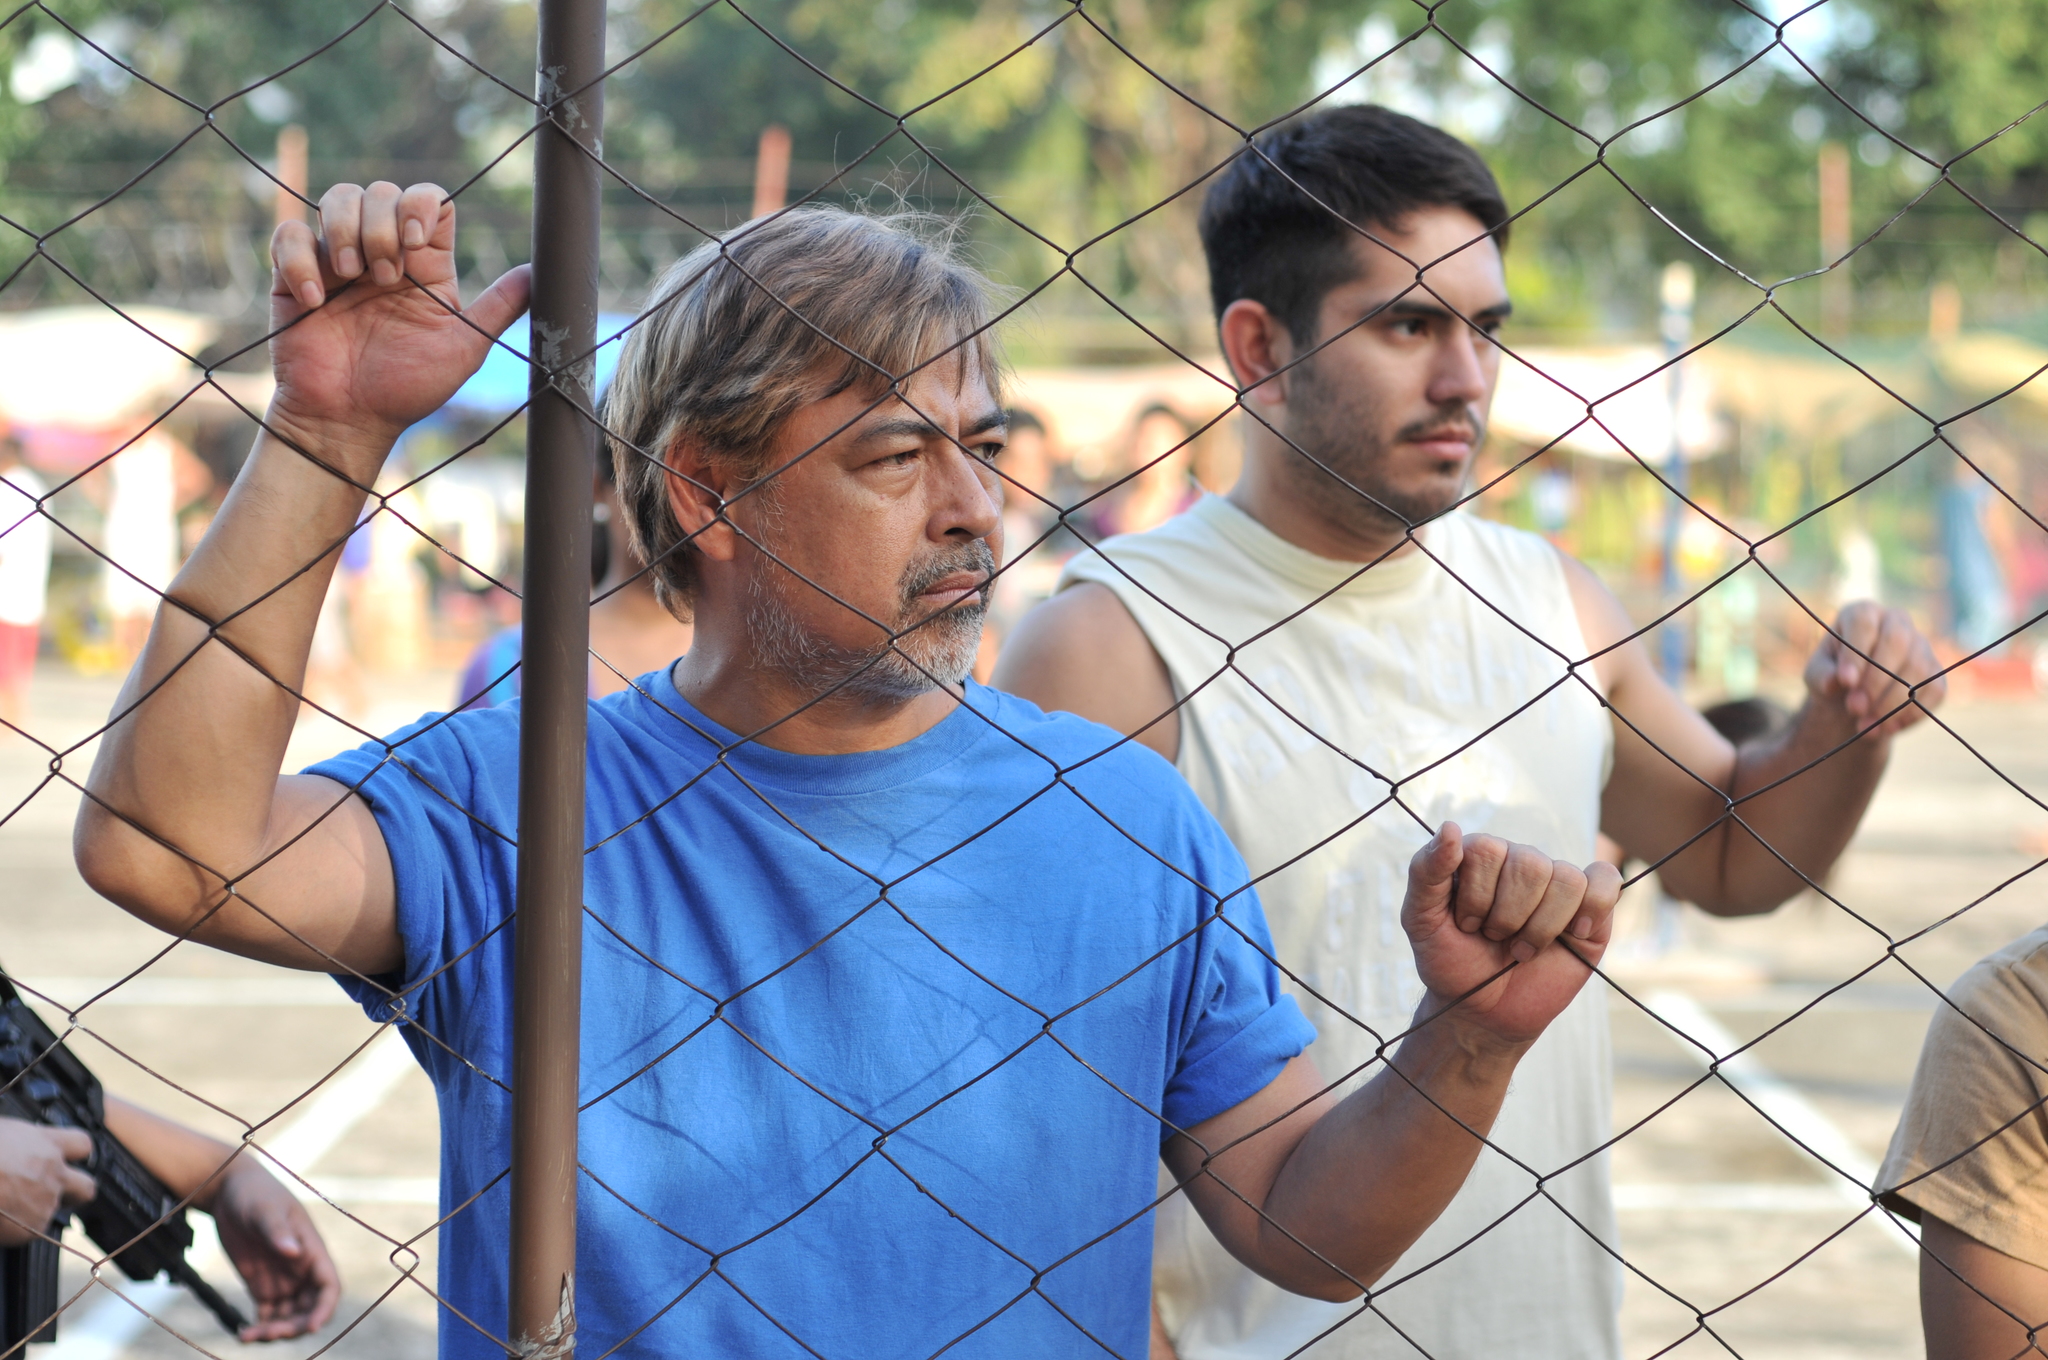 Still of Joel Torre and Gerald Anderson in On the Job (2013)